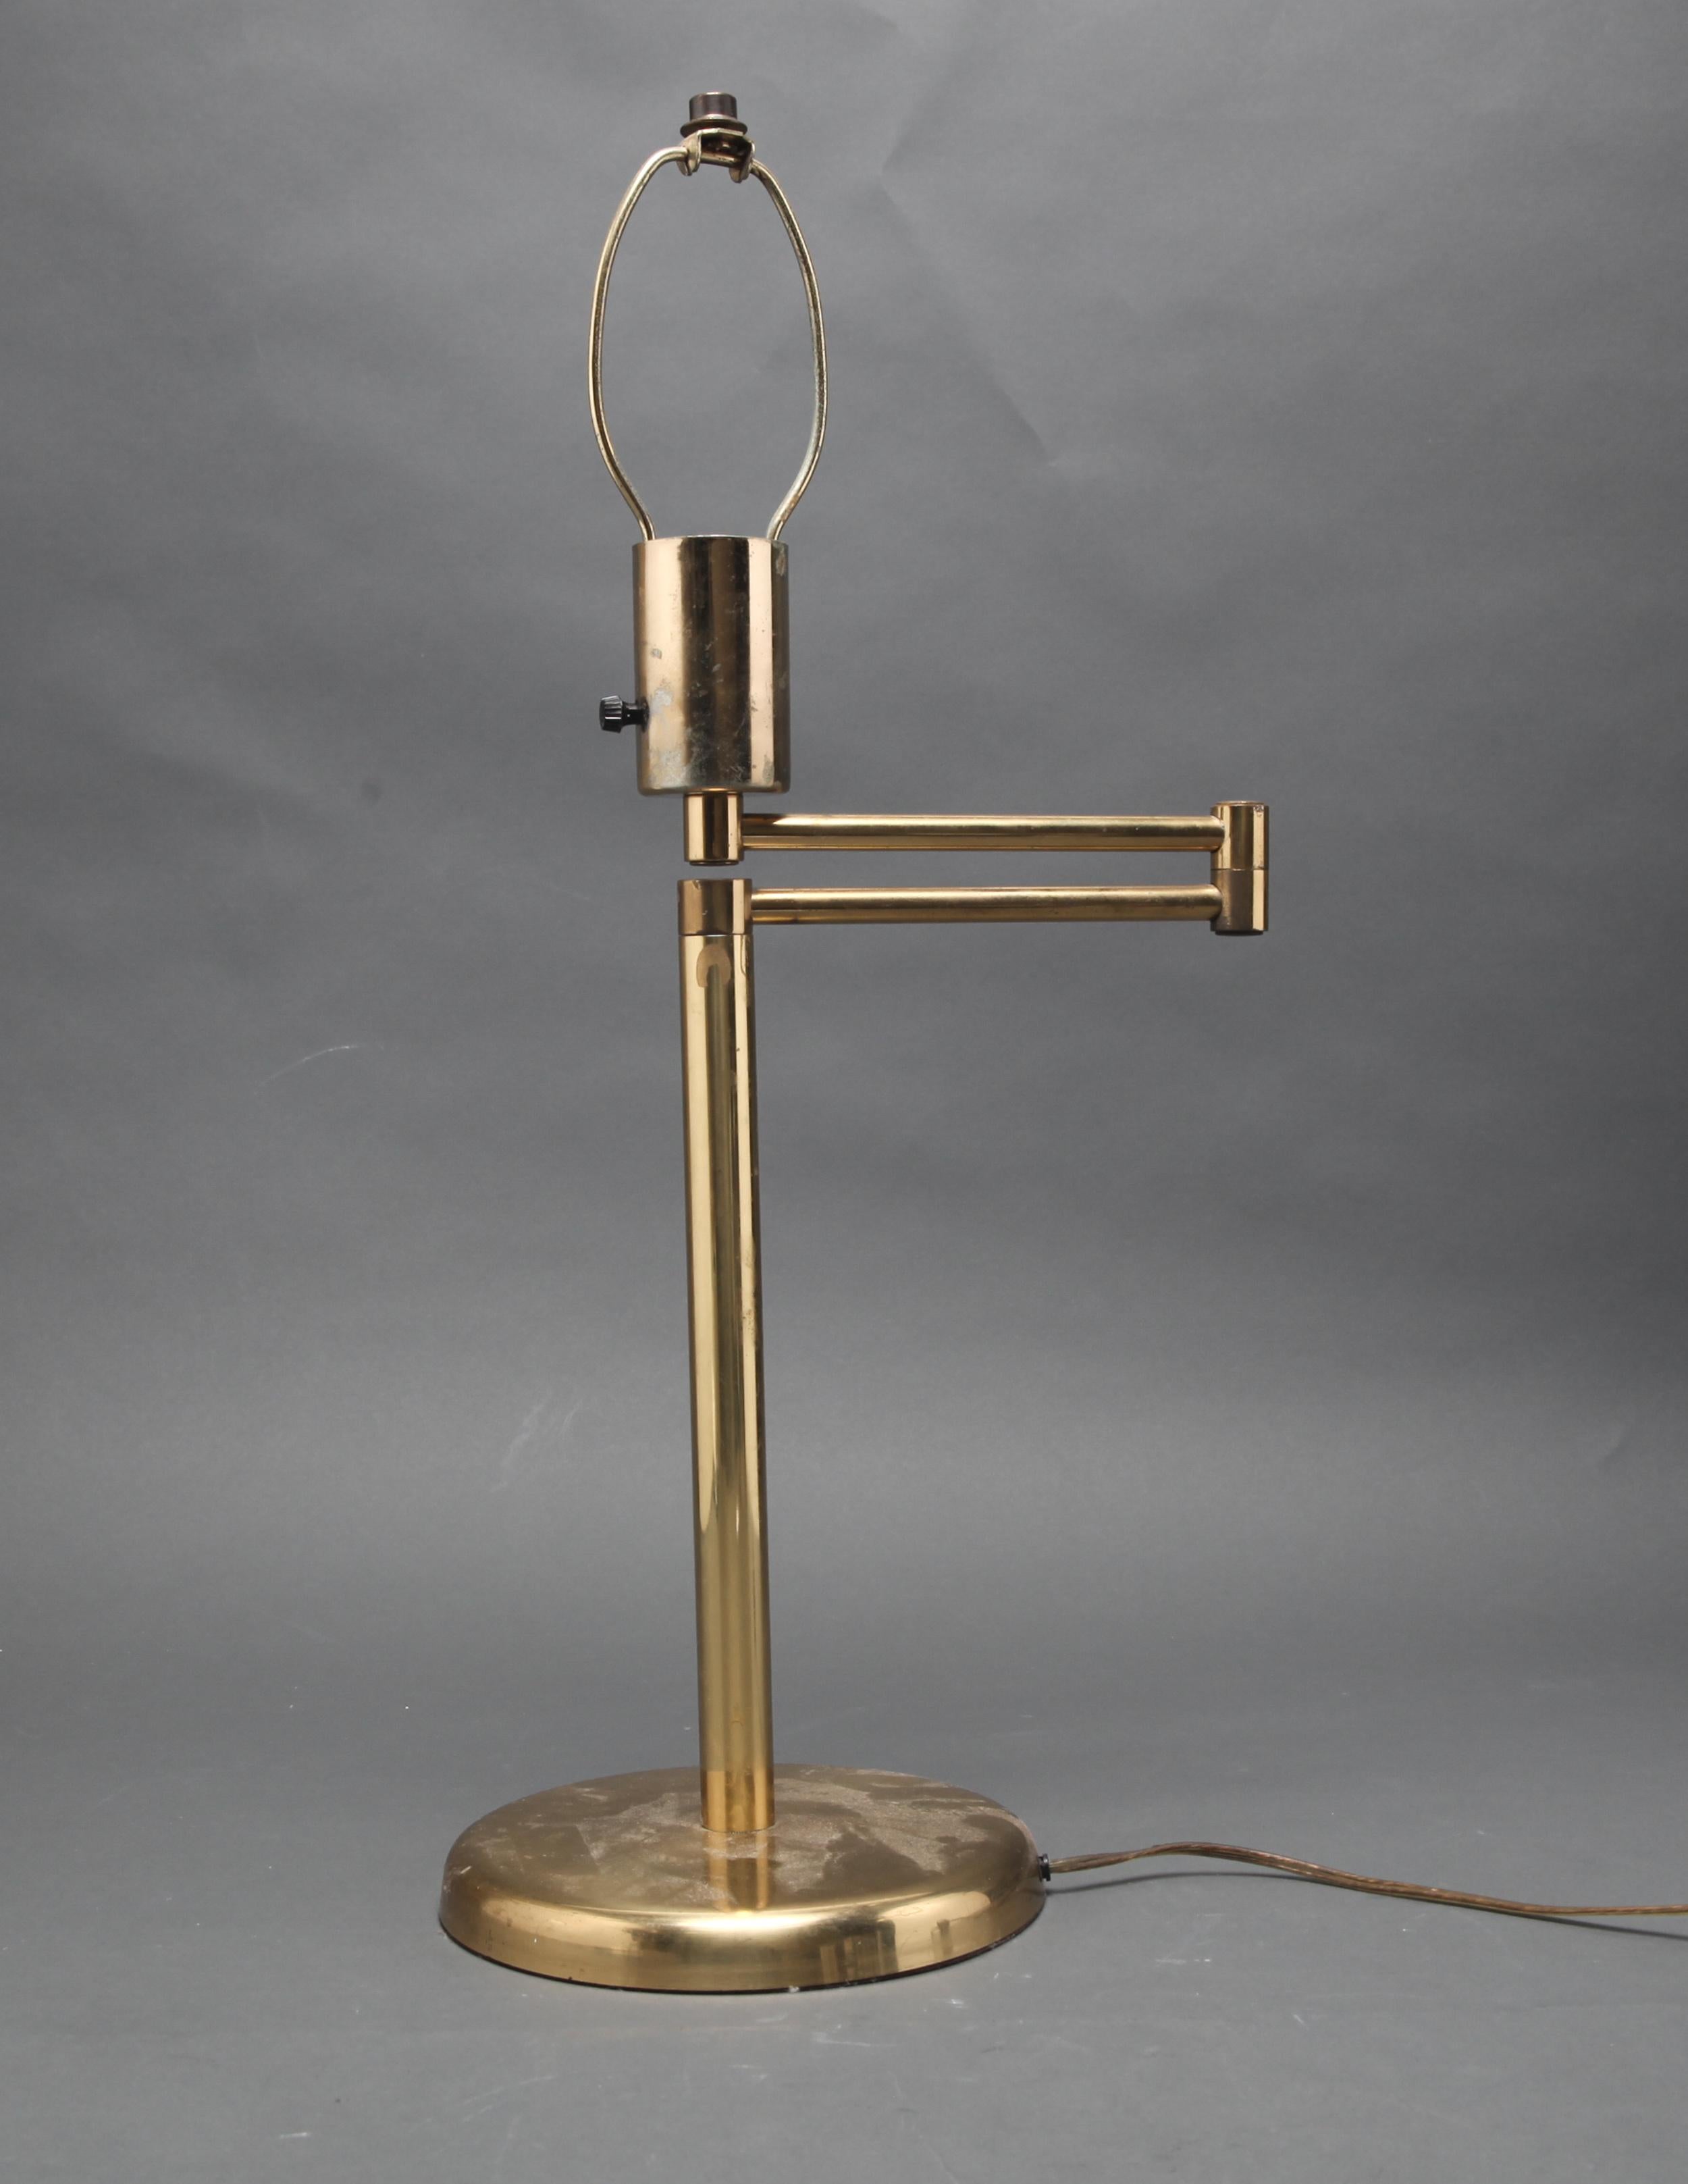 Mid-Century Modern brass table lamp with adjustable swing arm designed by George Hansen, with a round base. The piece is in great vintage condition with age-appropriate wear.